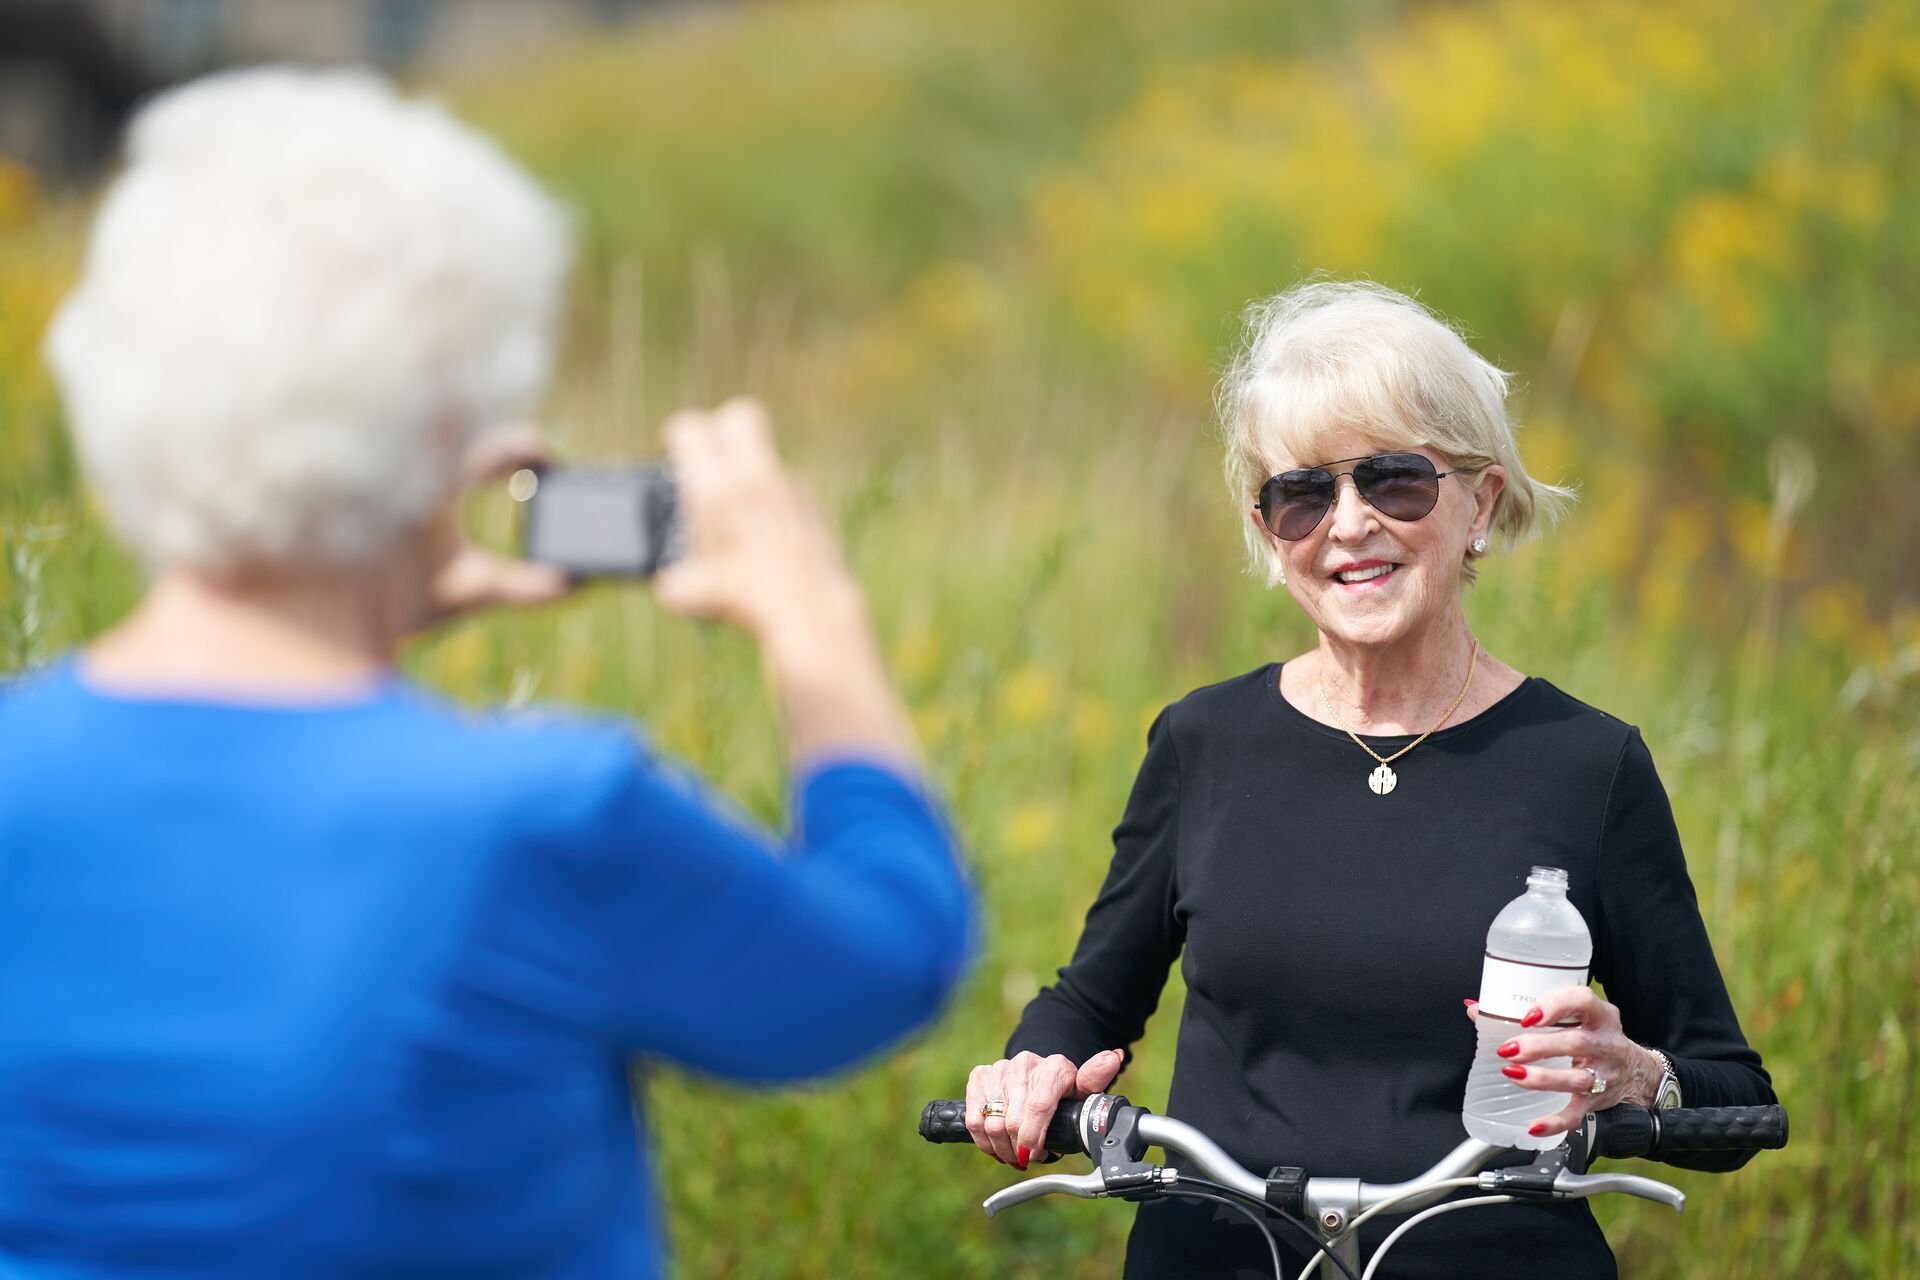 A senior woman poses with her bicycle for a picture while on a bike ride.